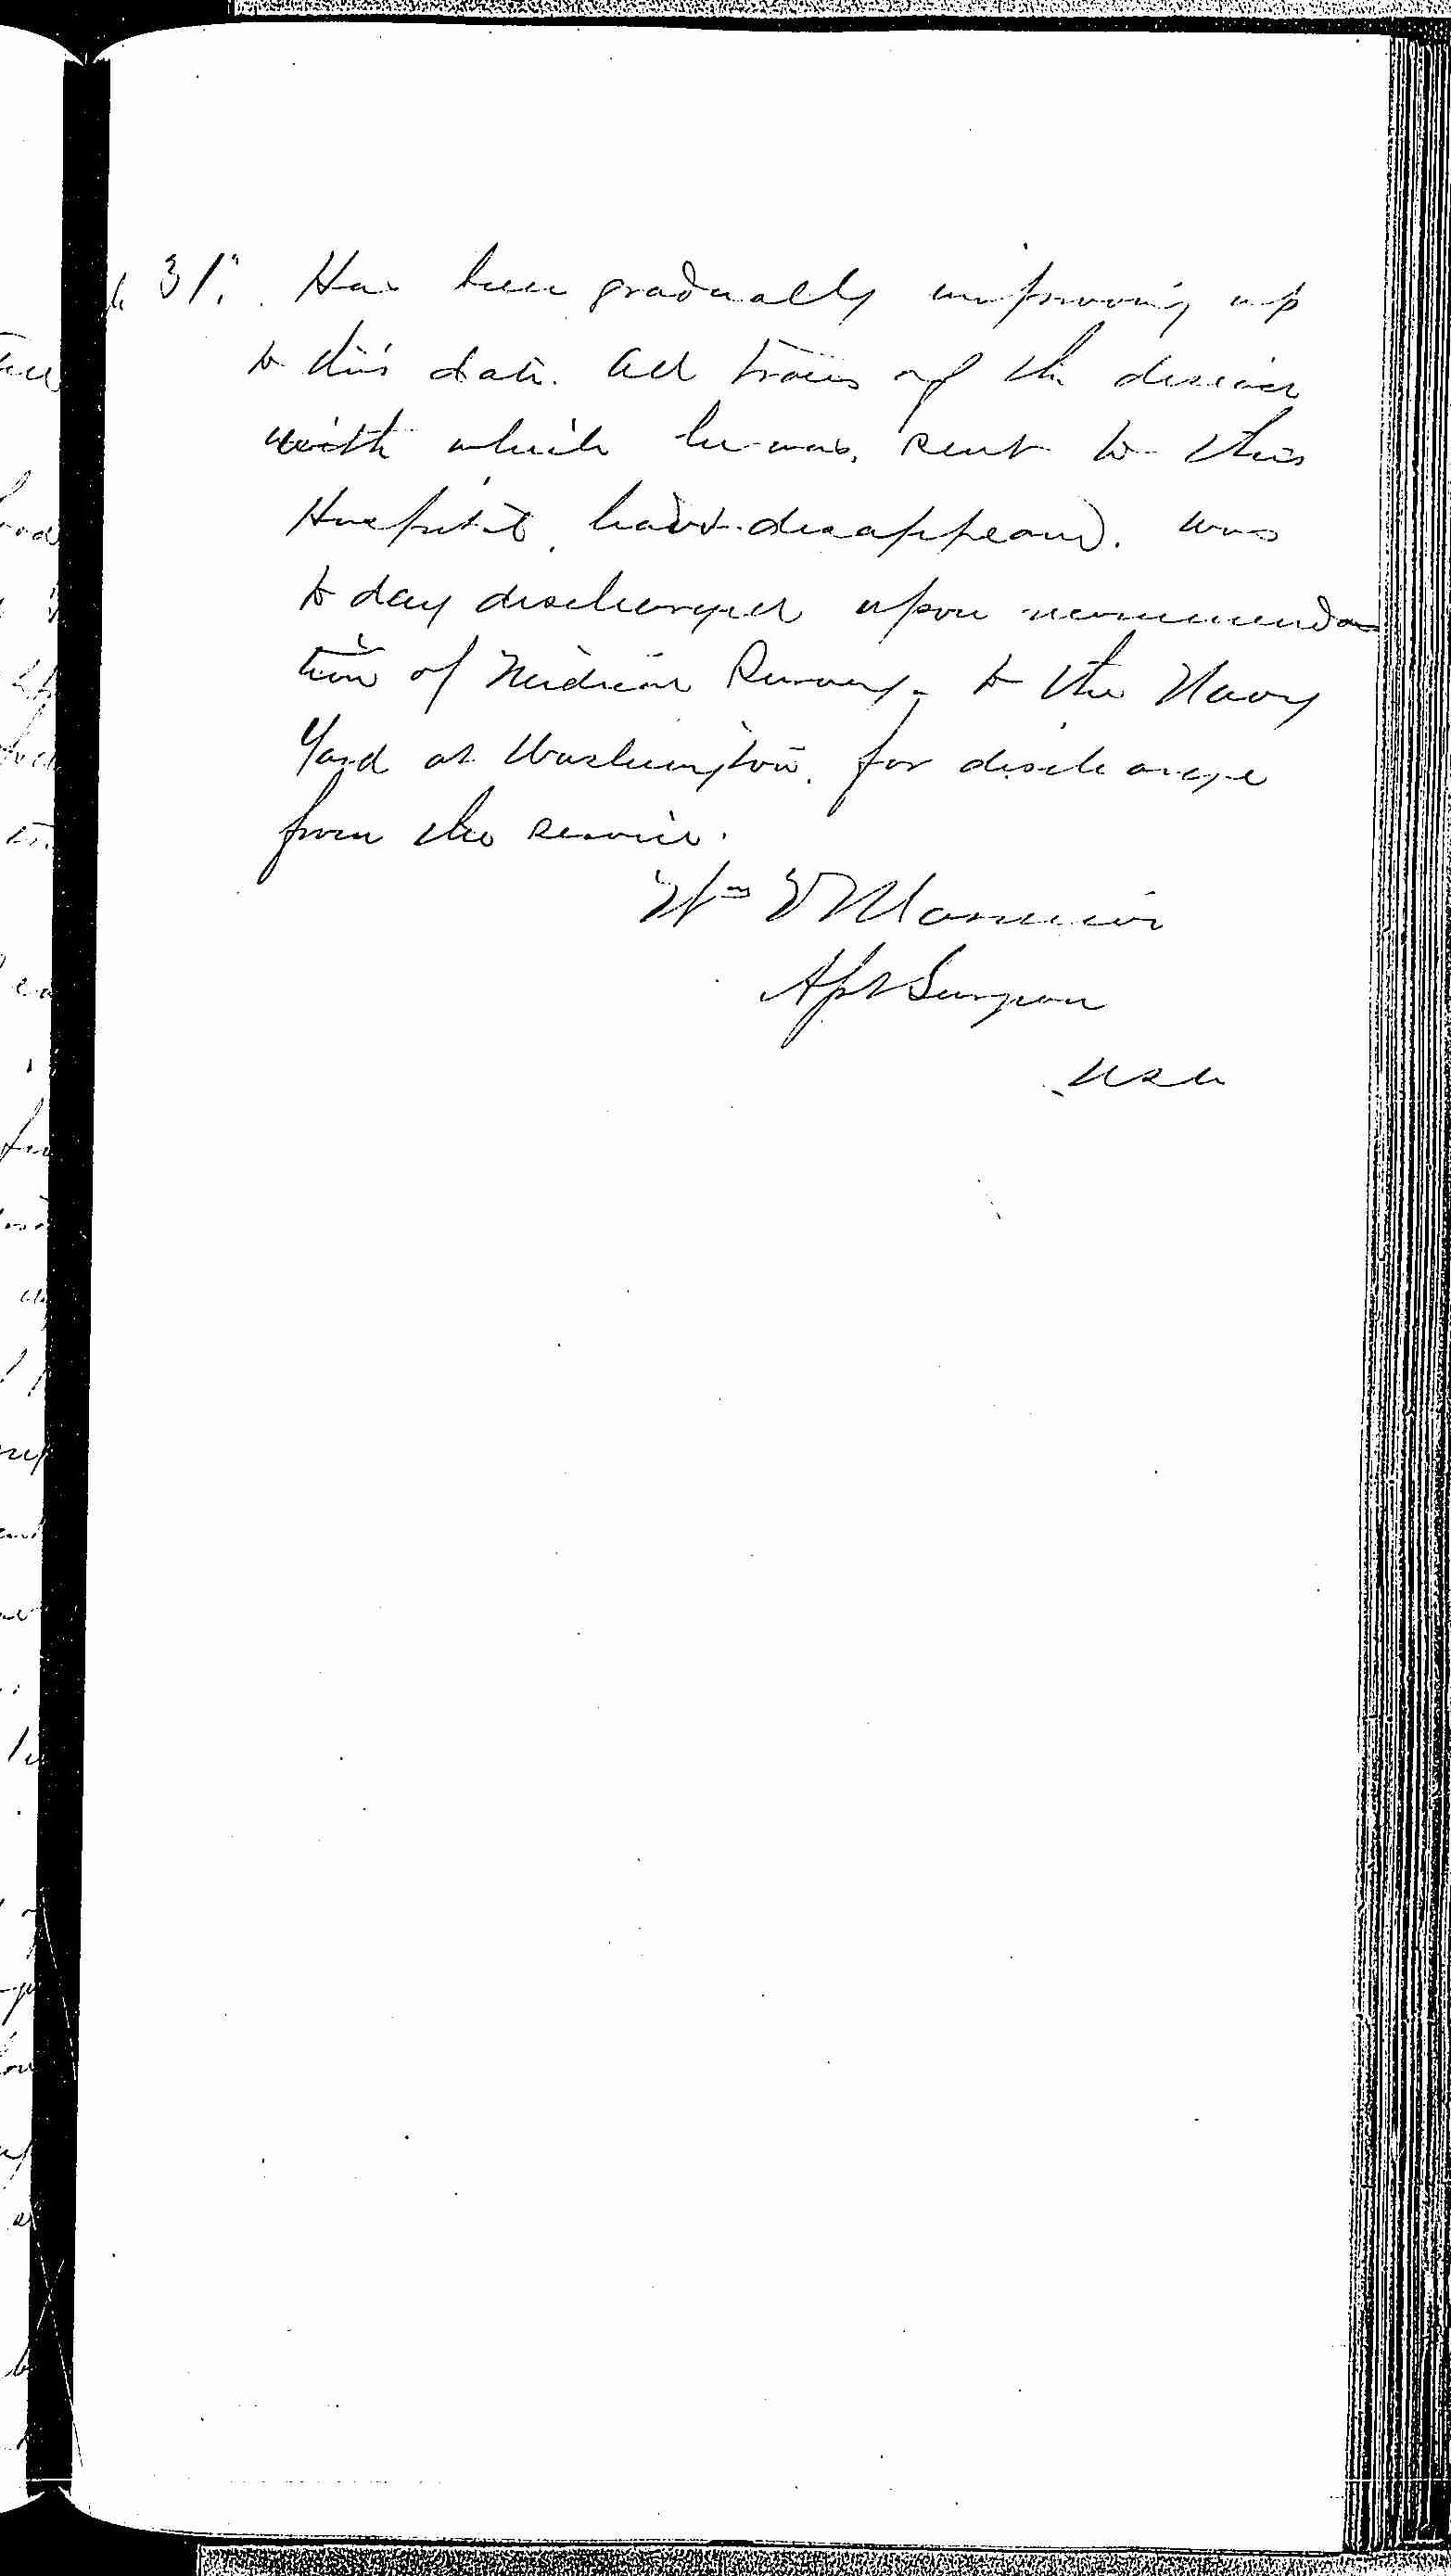 Entry for John Kerwin (page 3 of 3) in the log Hospital Tickets and Case Papers - Naval Hospital - Washington, D.C. - 1868-69